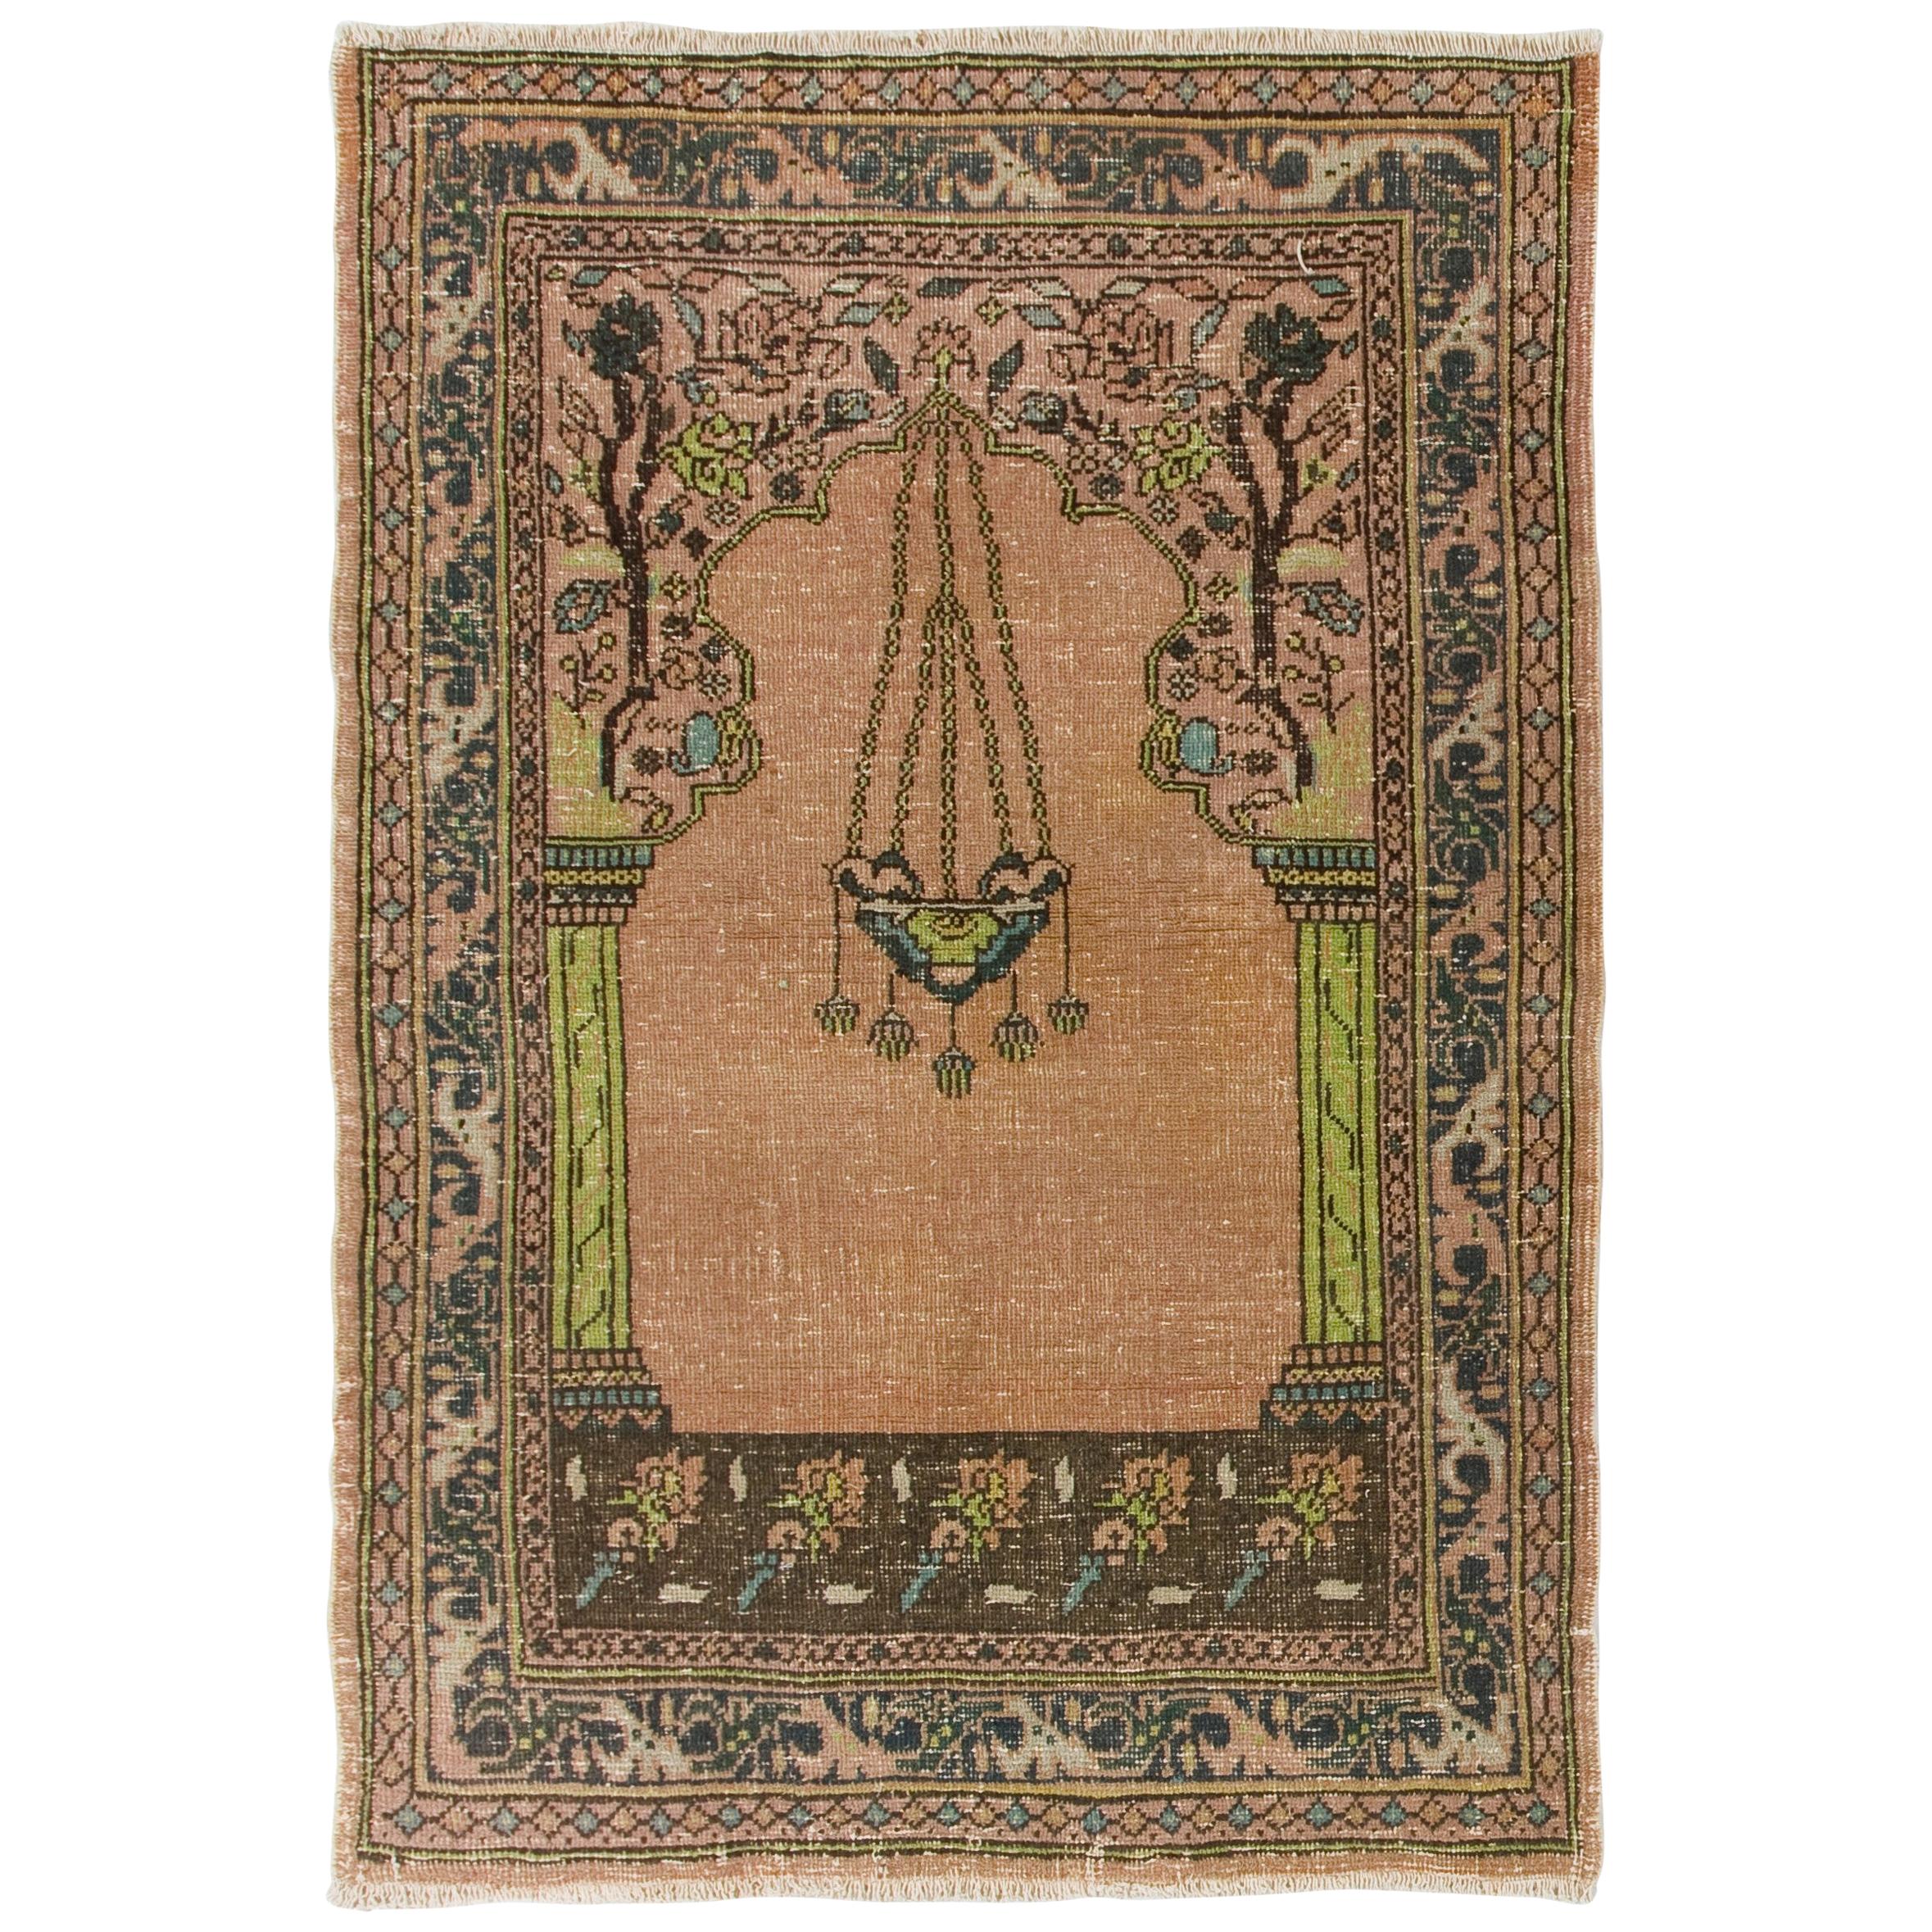 Vintage Turkish Prayer Rug Depicting a Chandelier, Couple of Columns and Flowers